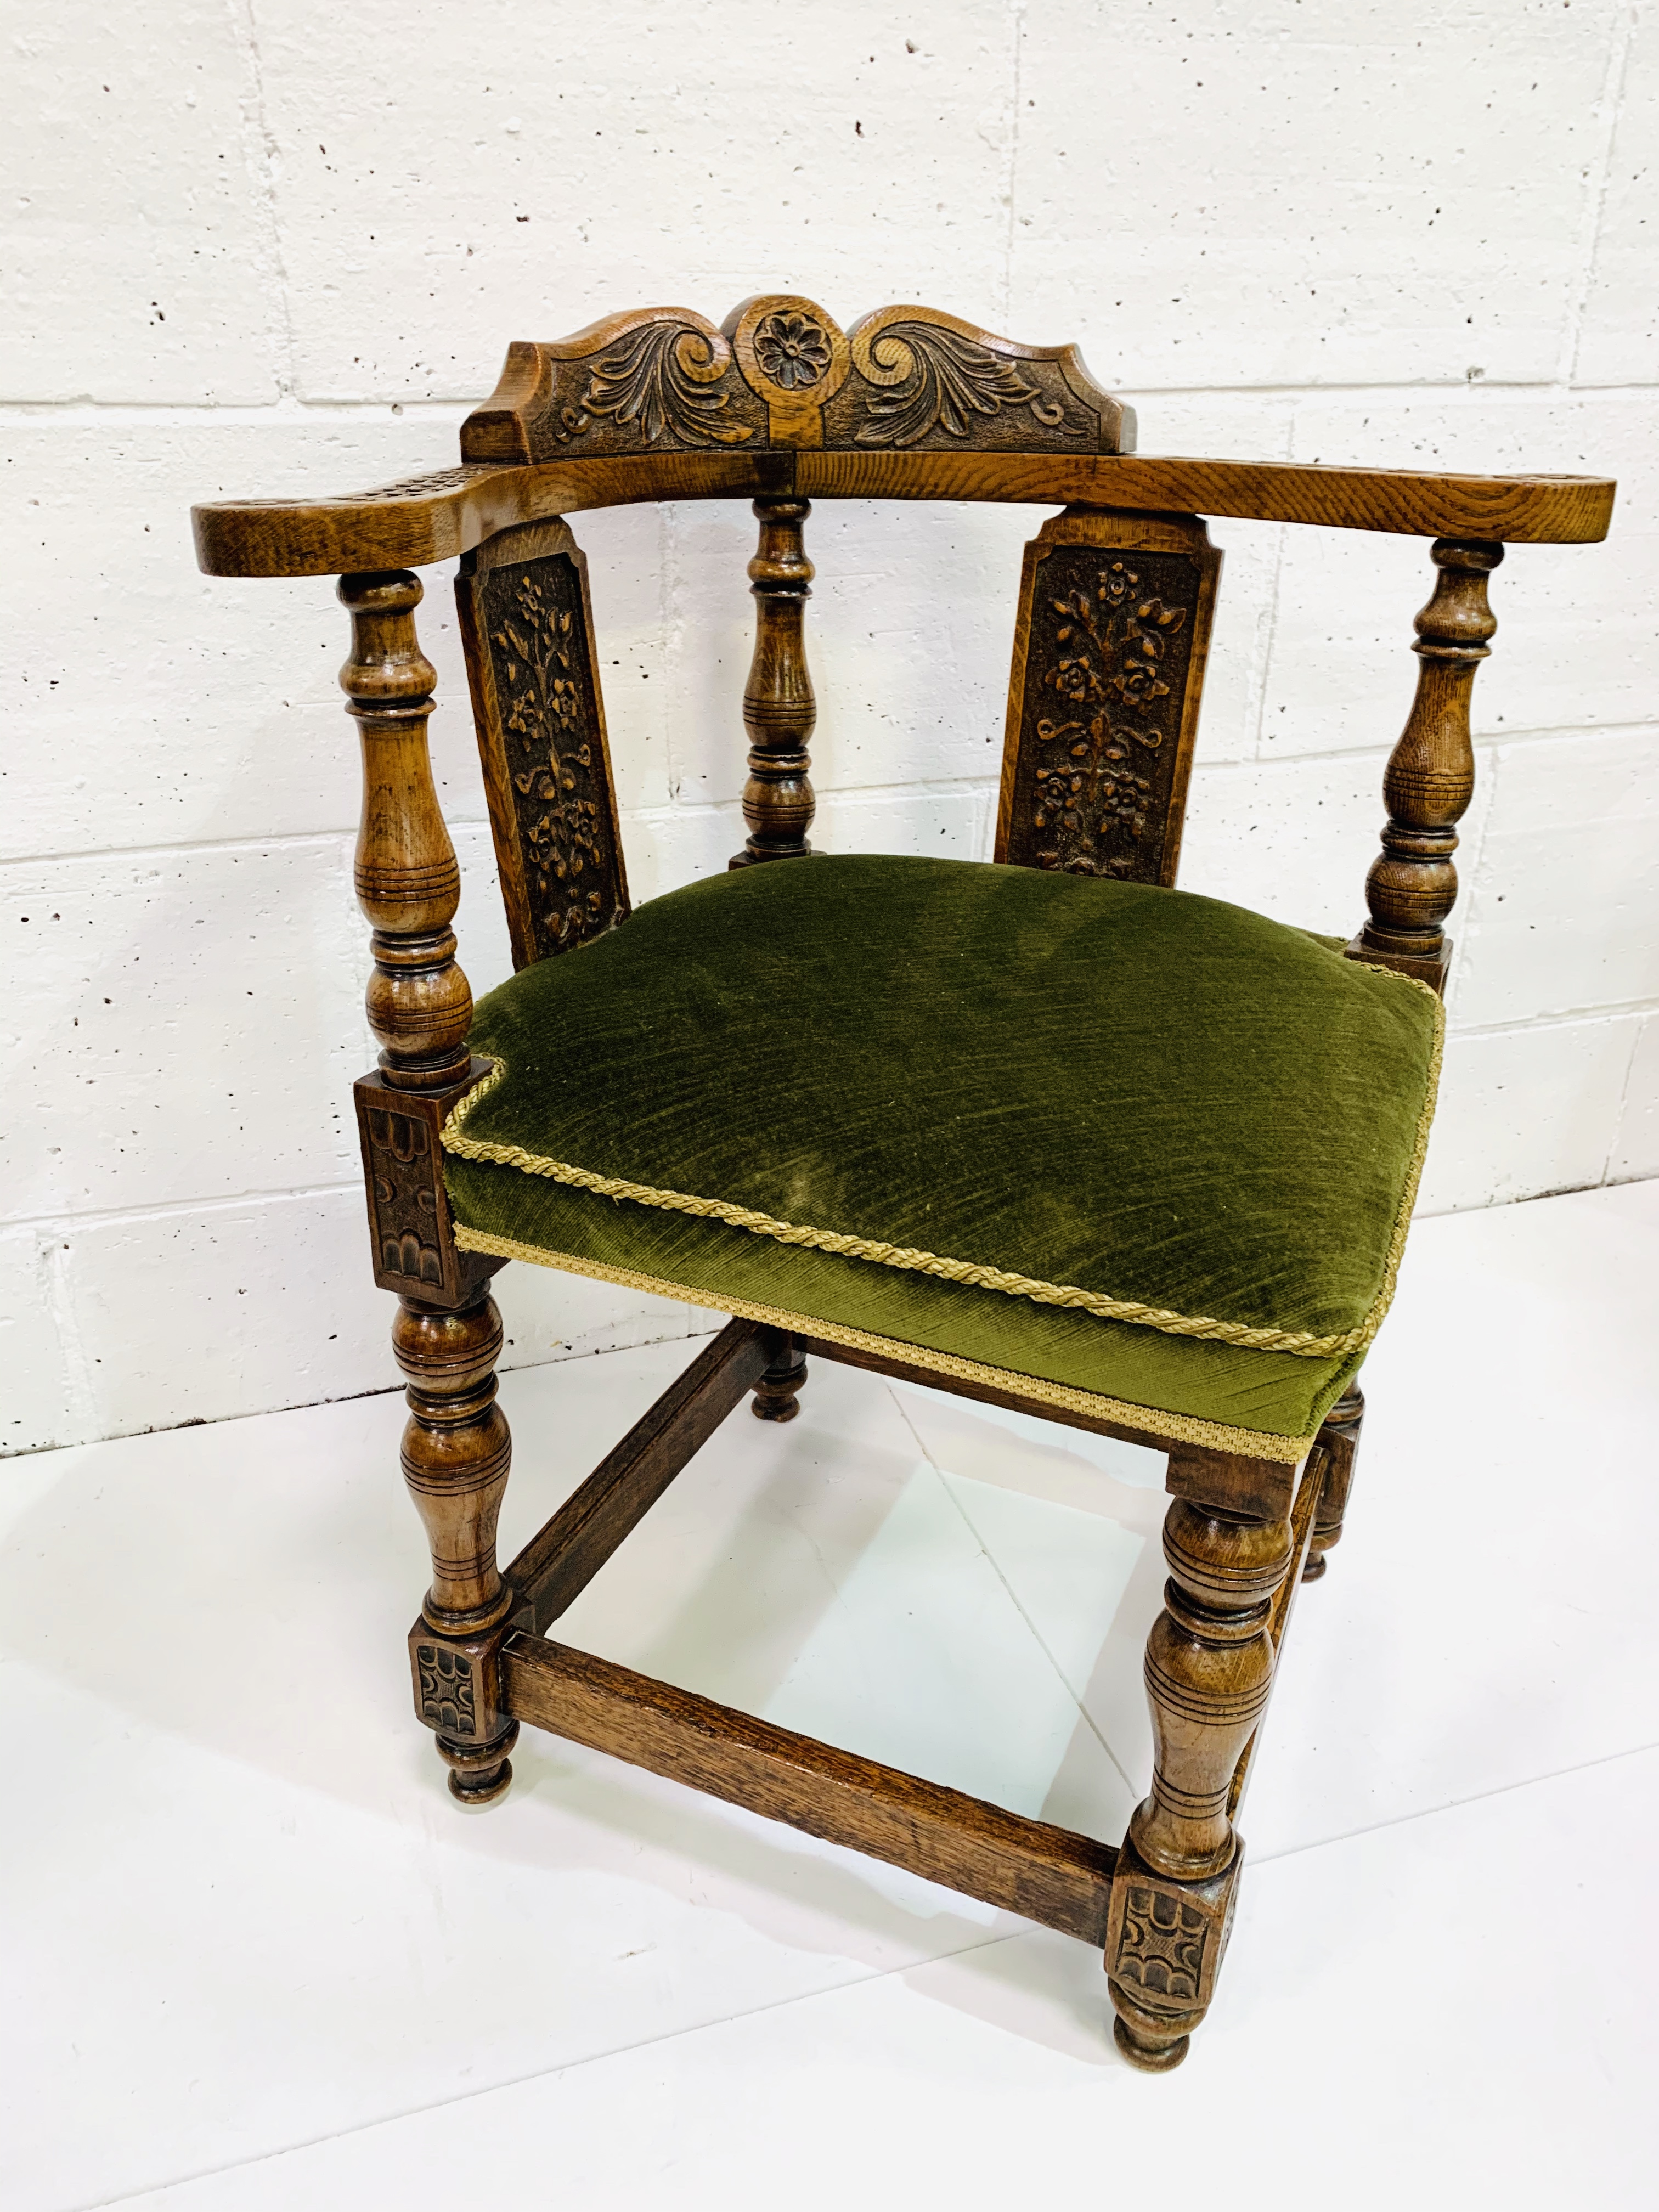 Oak framed corner chair, heavily carved, with green upholstered seat. - Image 4 of 5